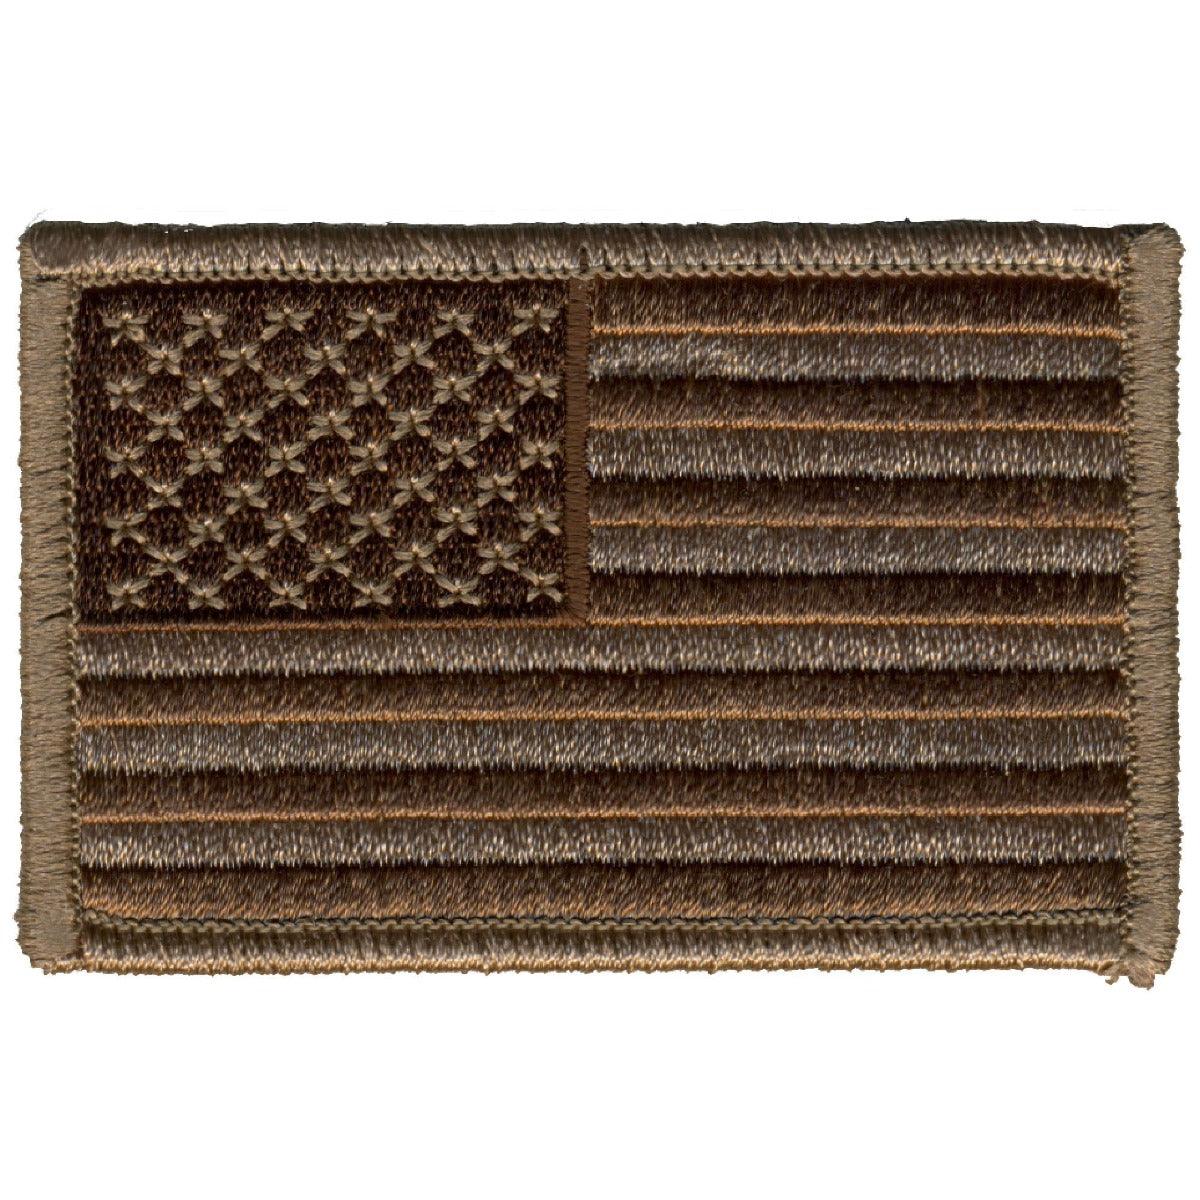 Hot Leathers 3" X 2" Brown American Flag Patch - American Legend Rider